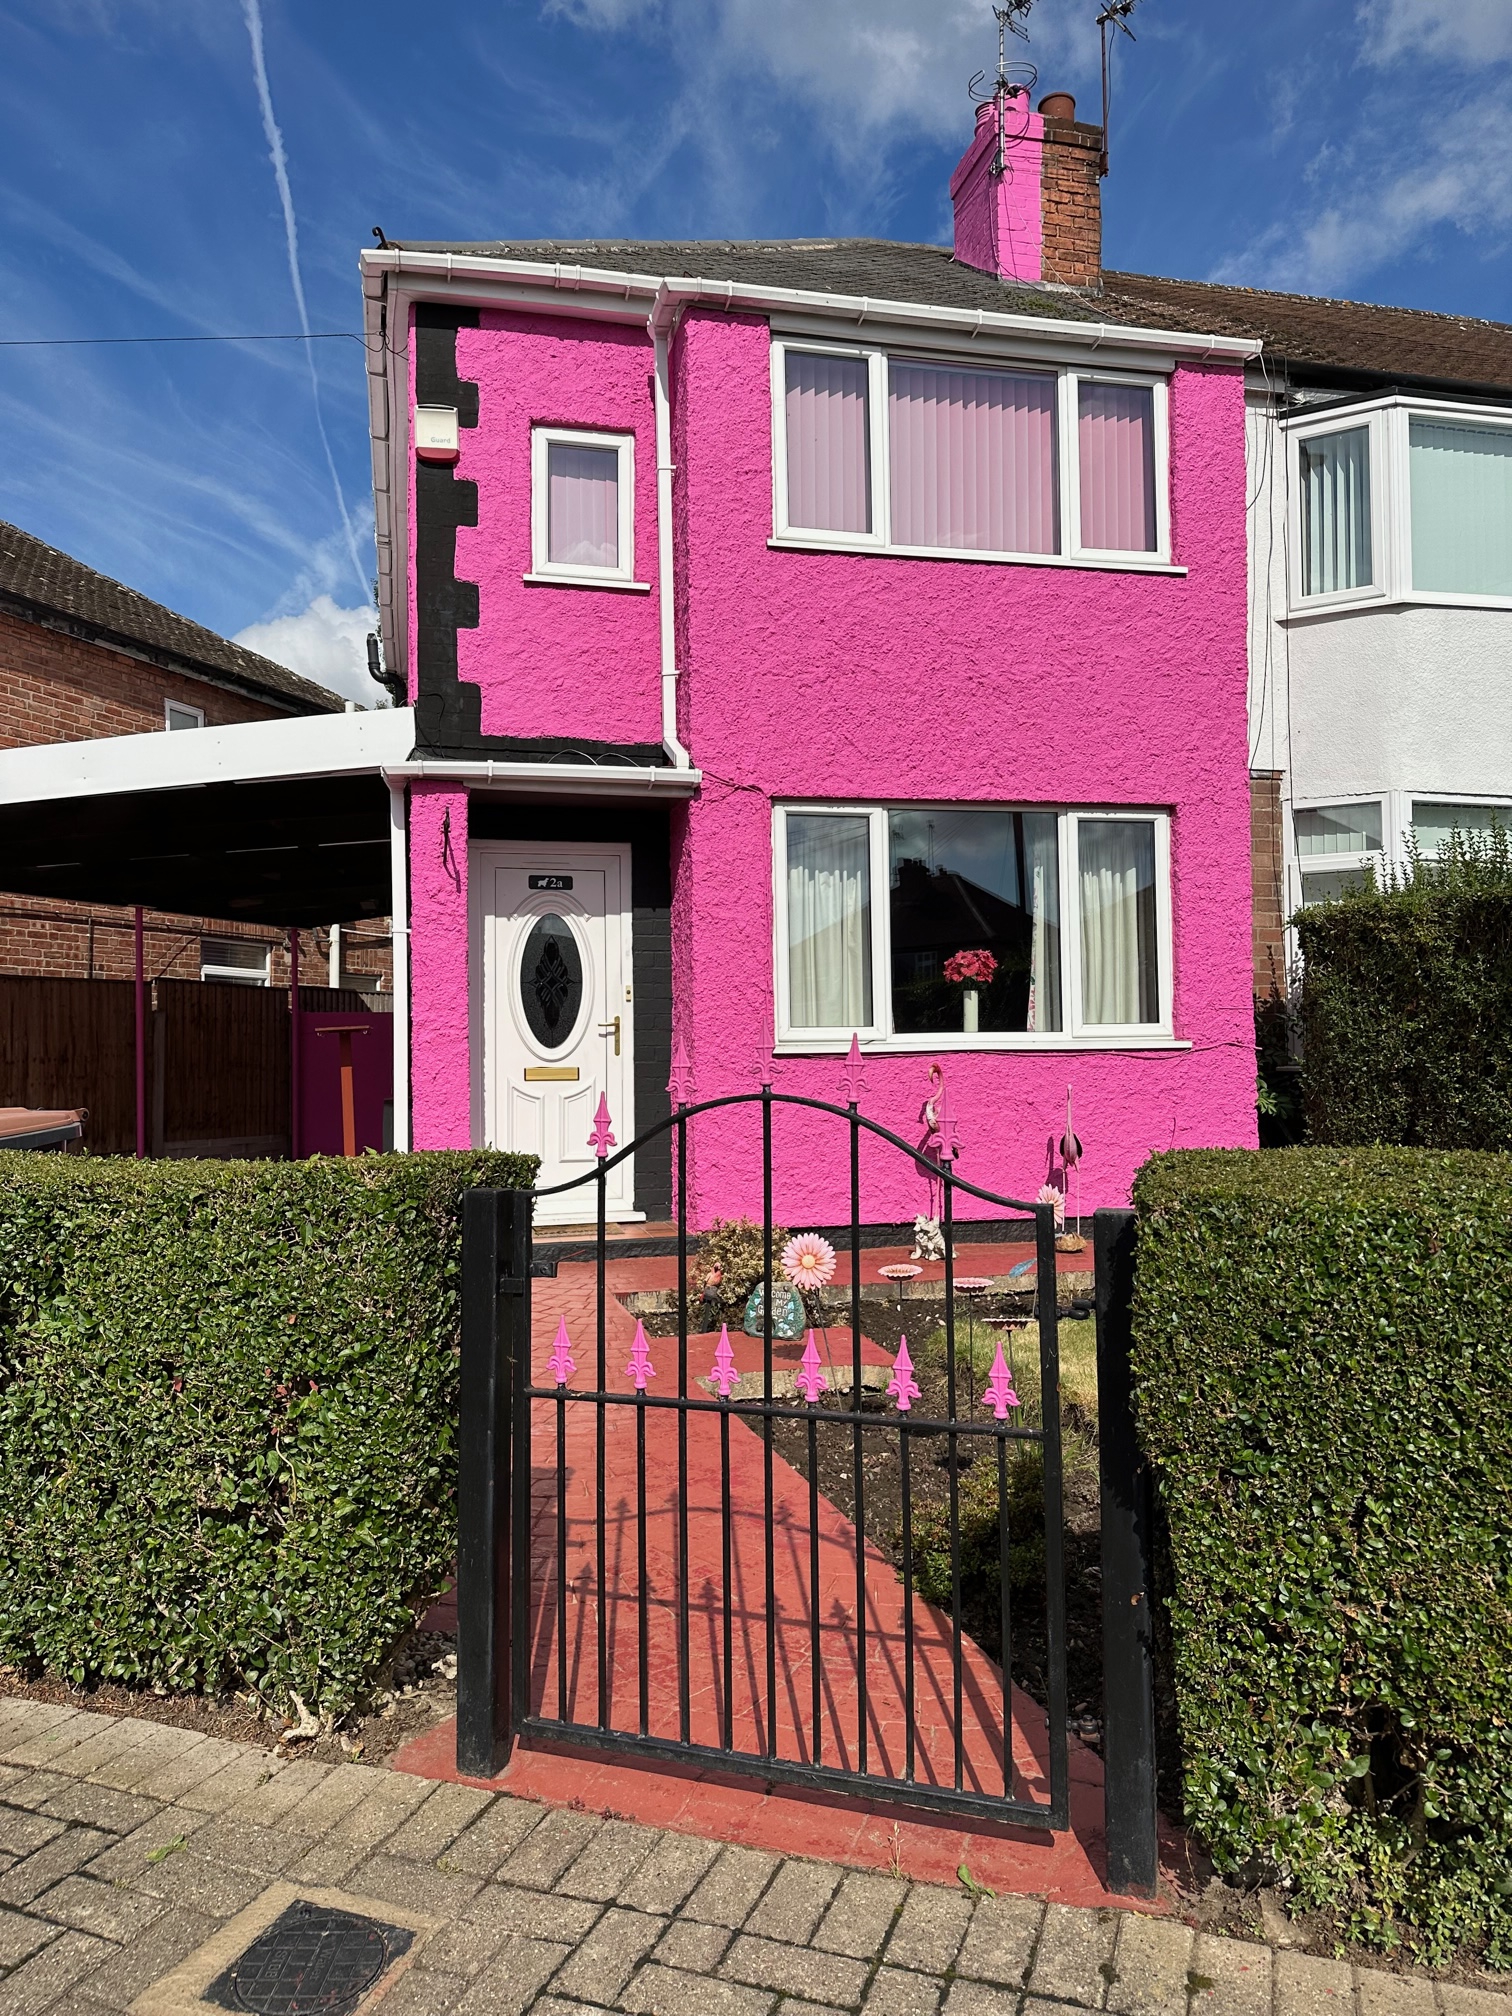 We’re furious after iconic bright pink Barbie house was painted over with a ‘boring’ colour – it’s all driven by money